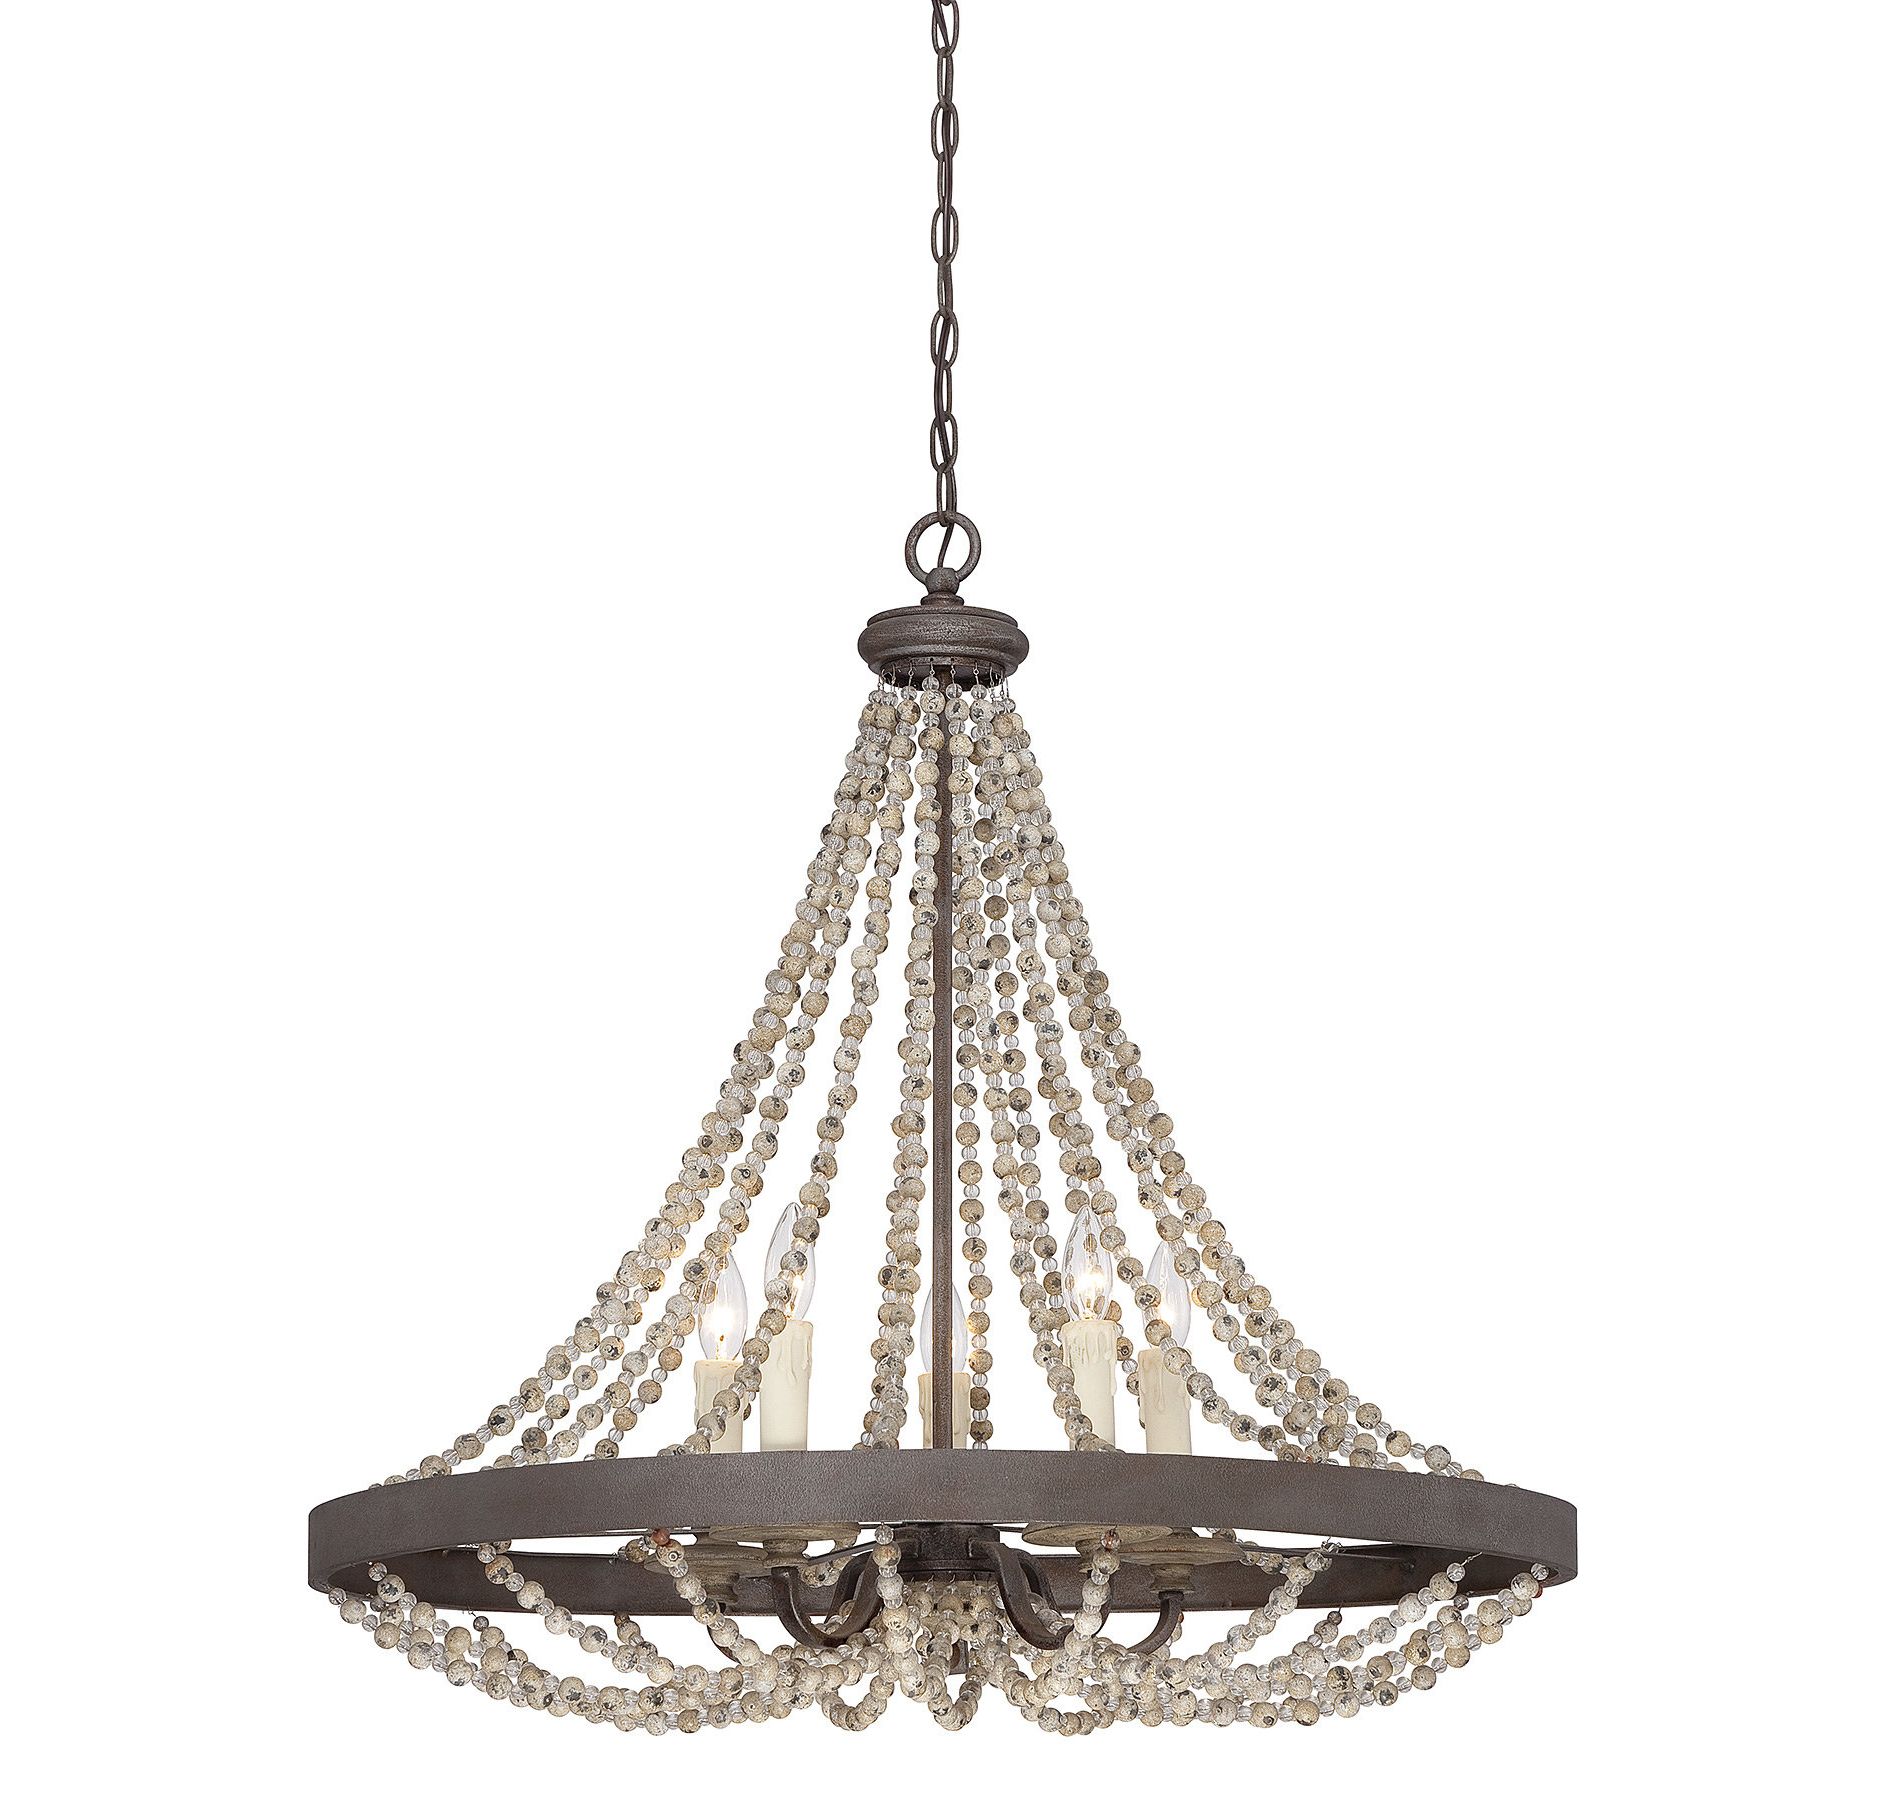 Ladonna 5 Light Novelty Chandeliers With Regard To Favorite Ladonna 5 Light Novelty Chandelier (View 1 of 25)